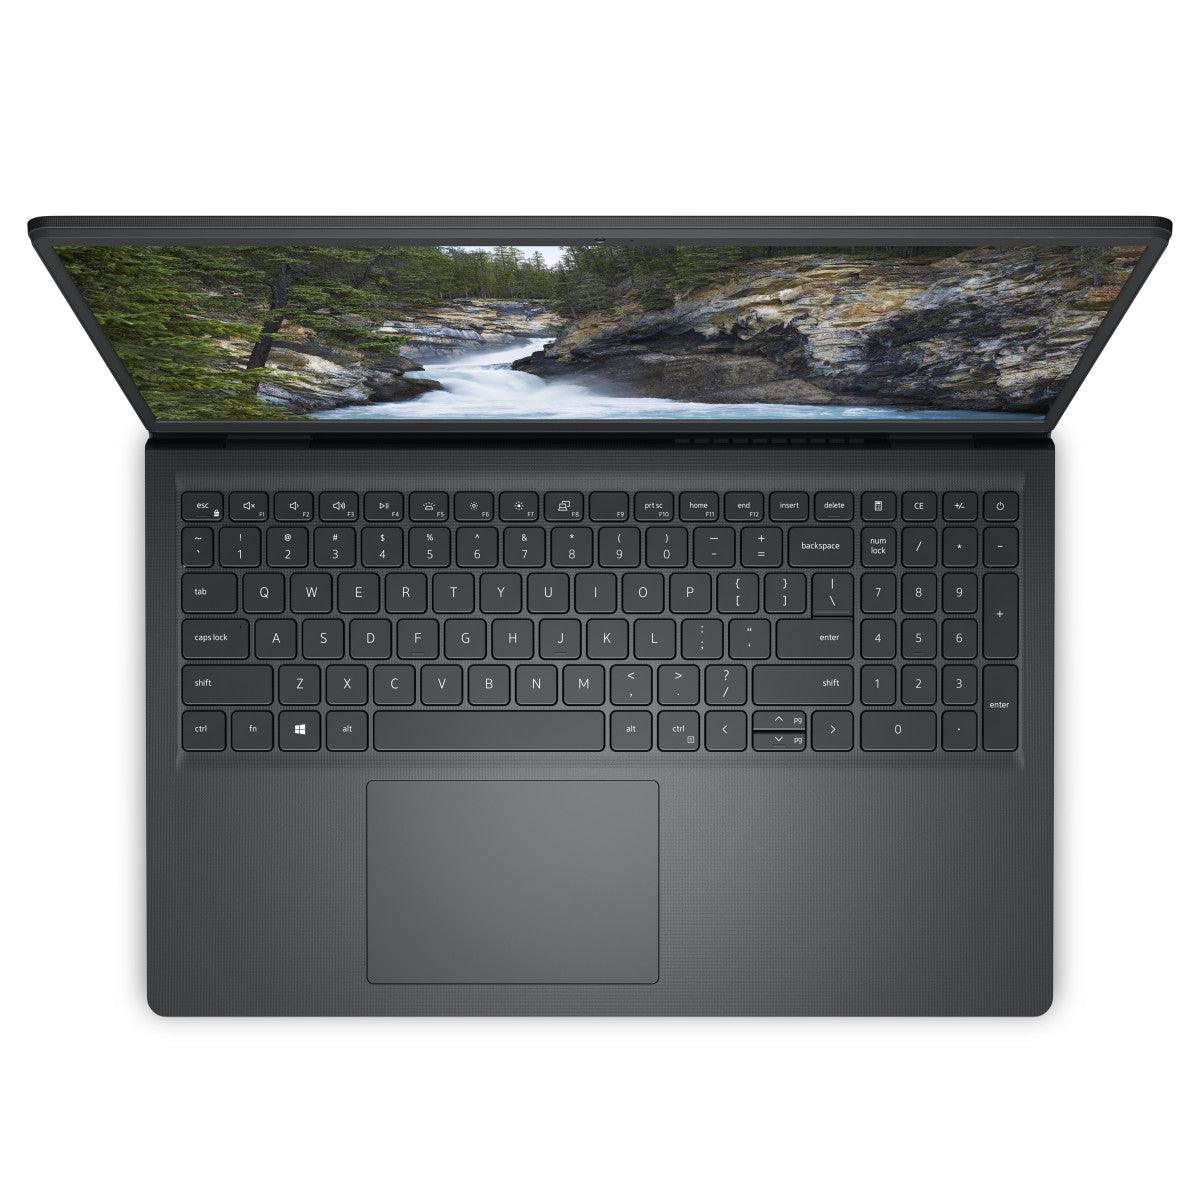 Dell Vostro 3520 15.6 inch Laptop - Want a New Gadget